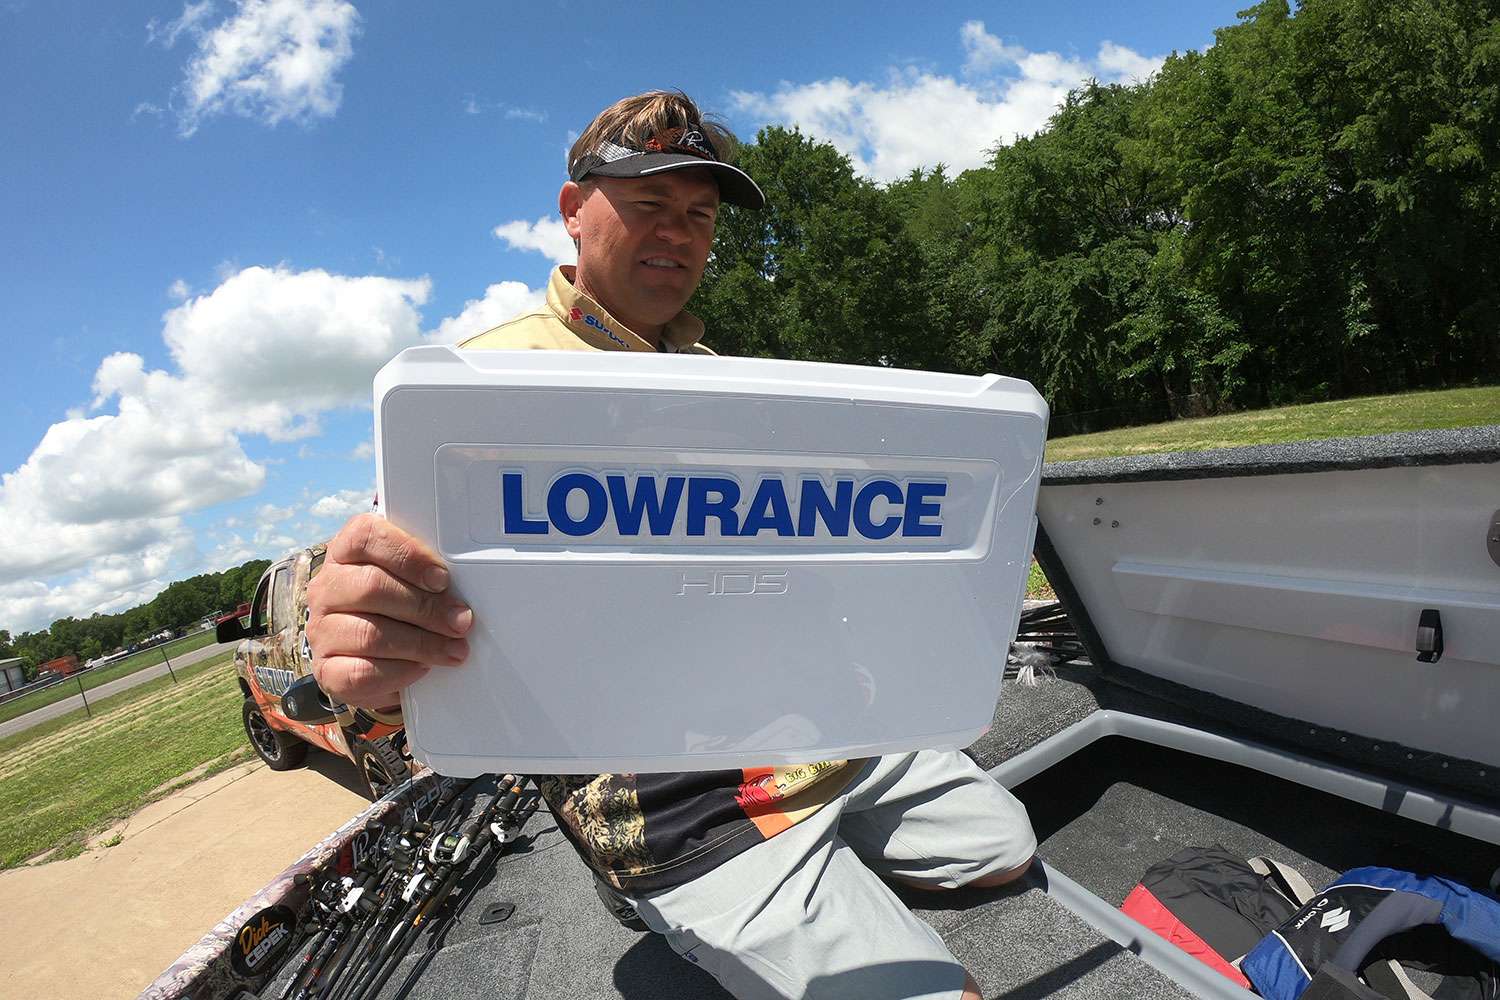 He keeps his Lowrance covers in there, too.